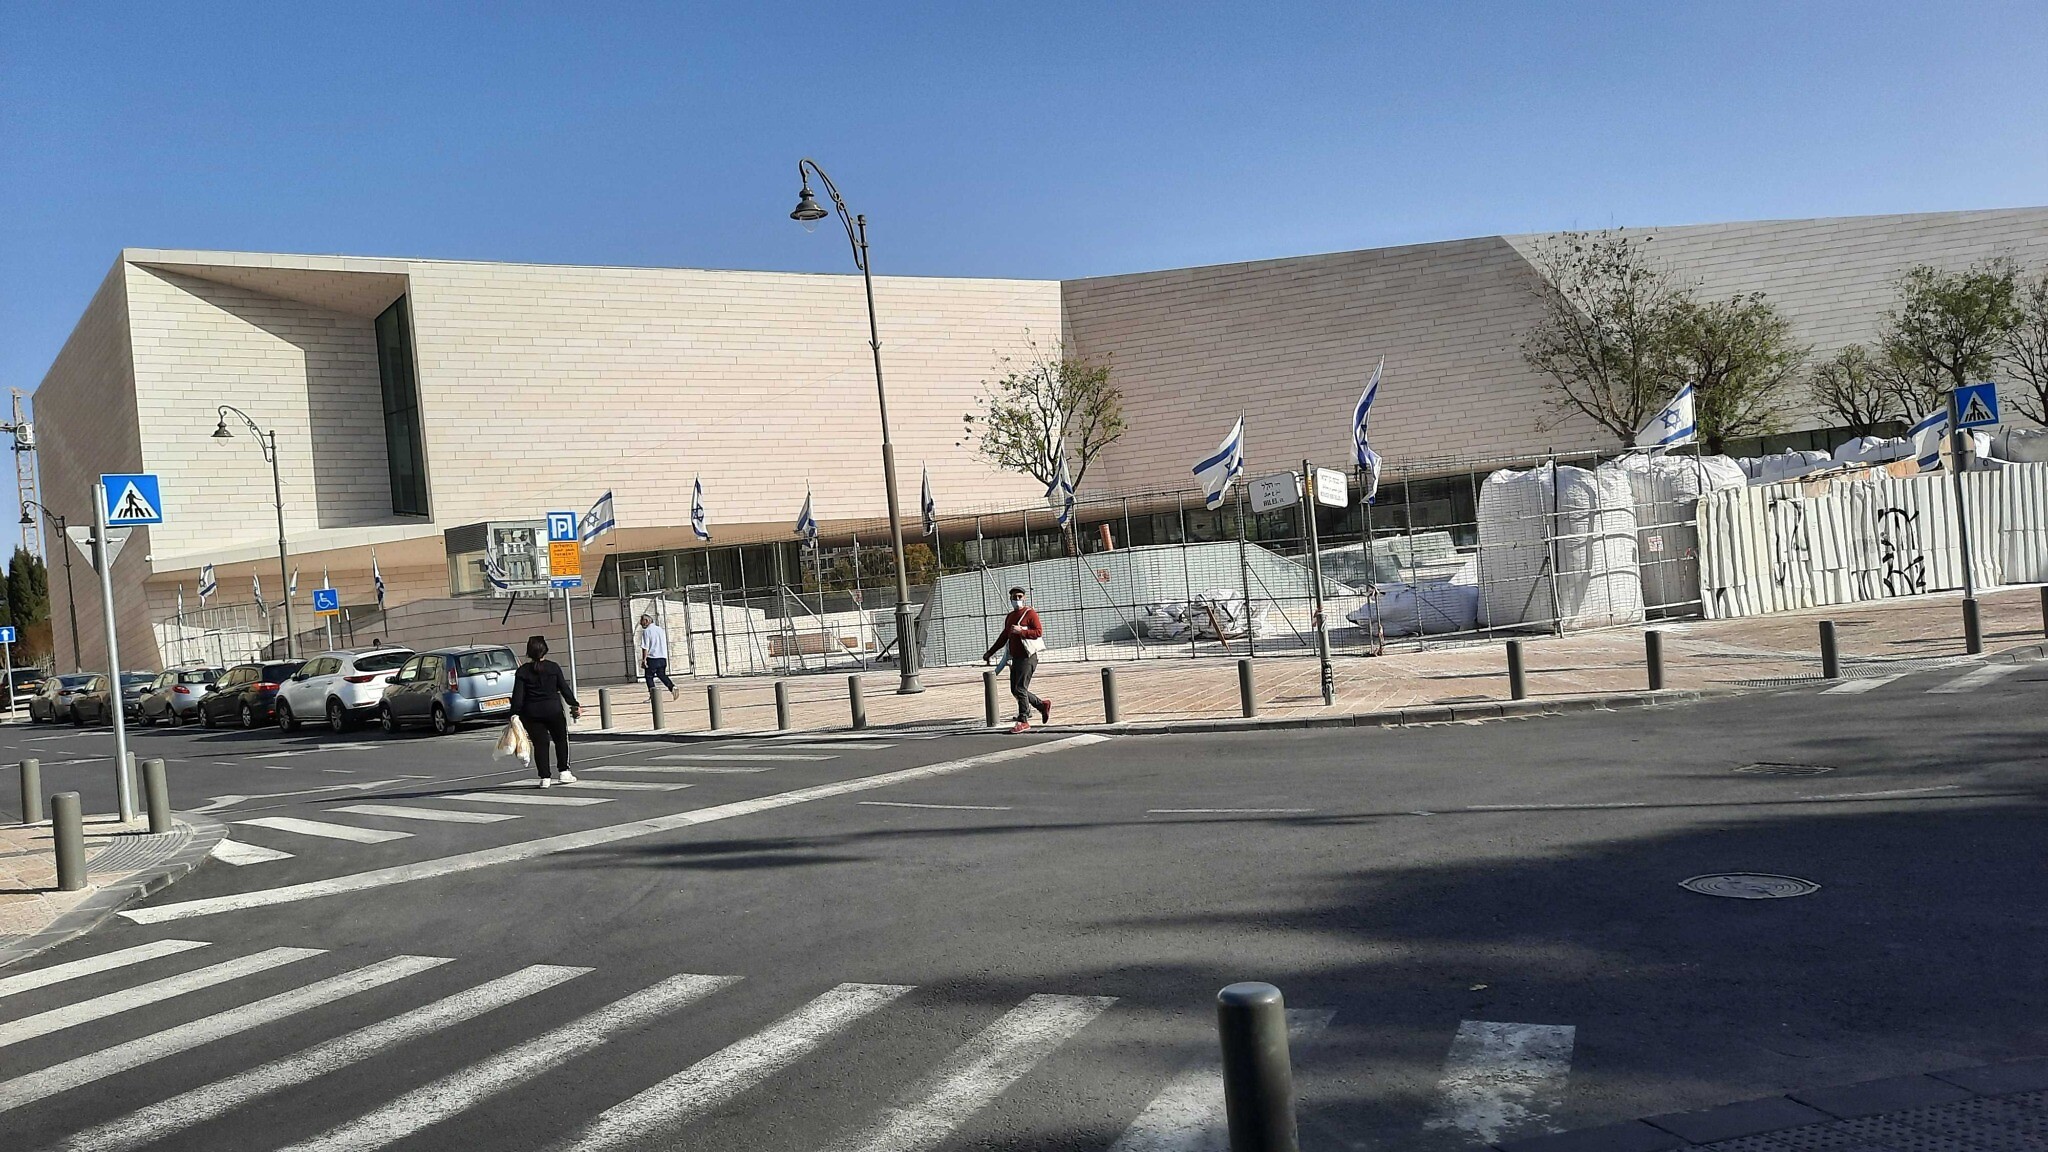 A view of the under-construction Museum of Tolerance Jerusalem on April 5, 2021. (Joshua Davidovich/Times of Israel)